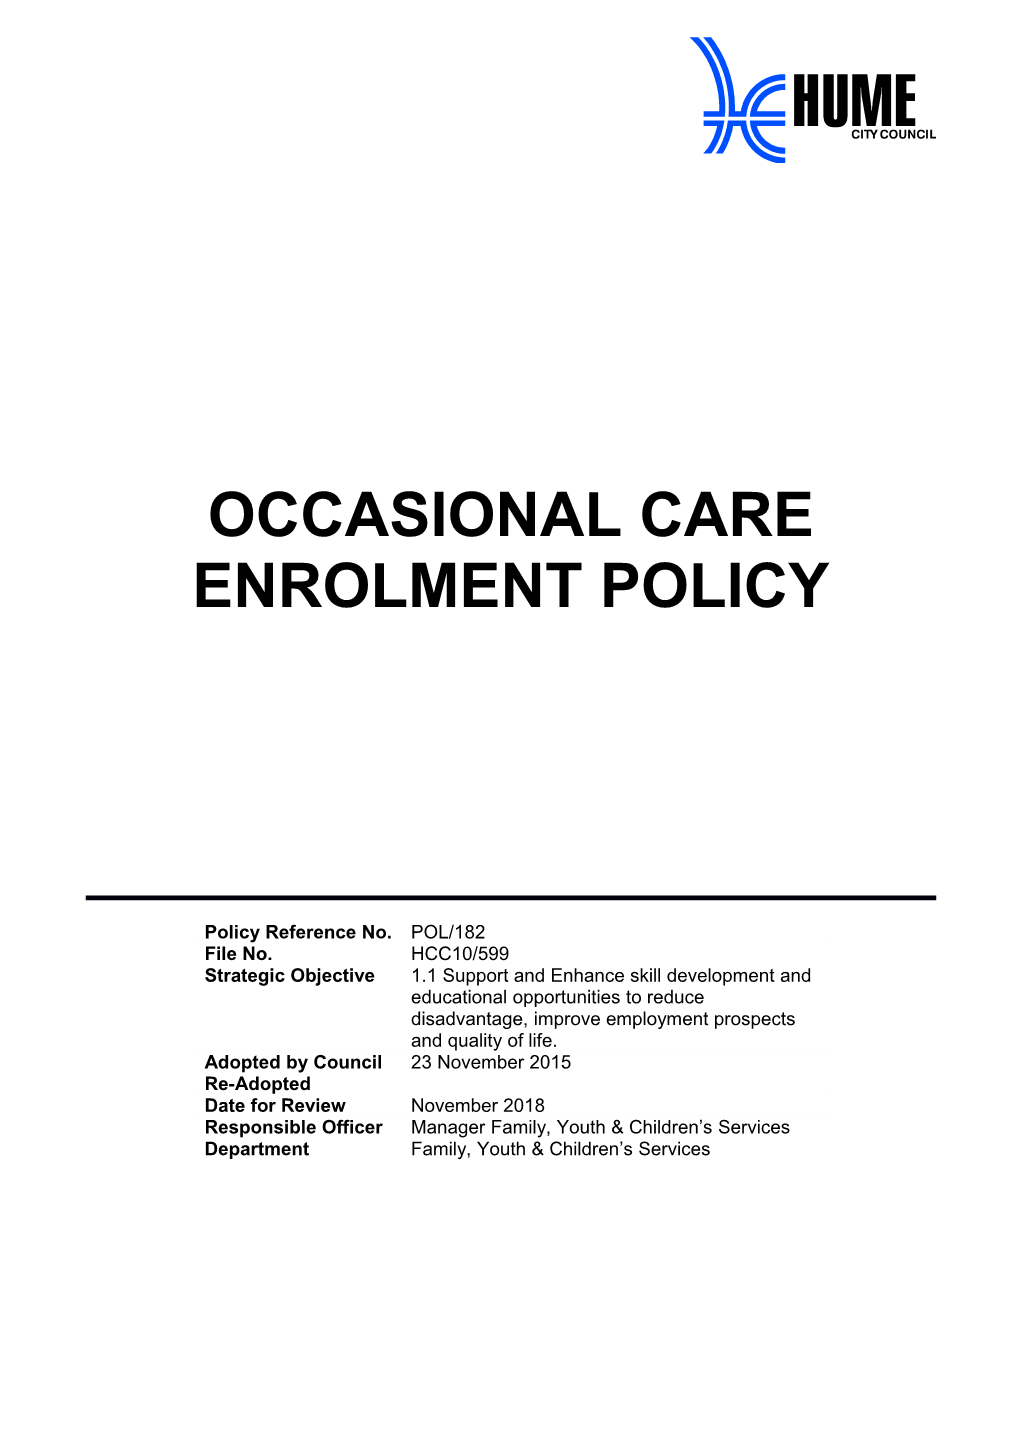 Occasional Care Enrolment Policy